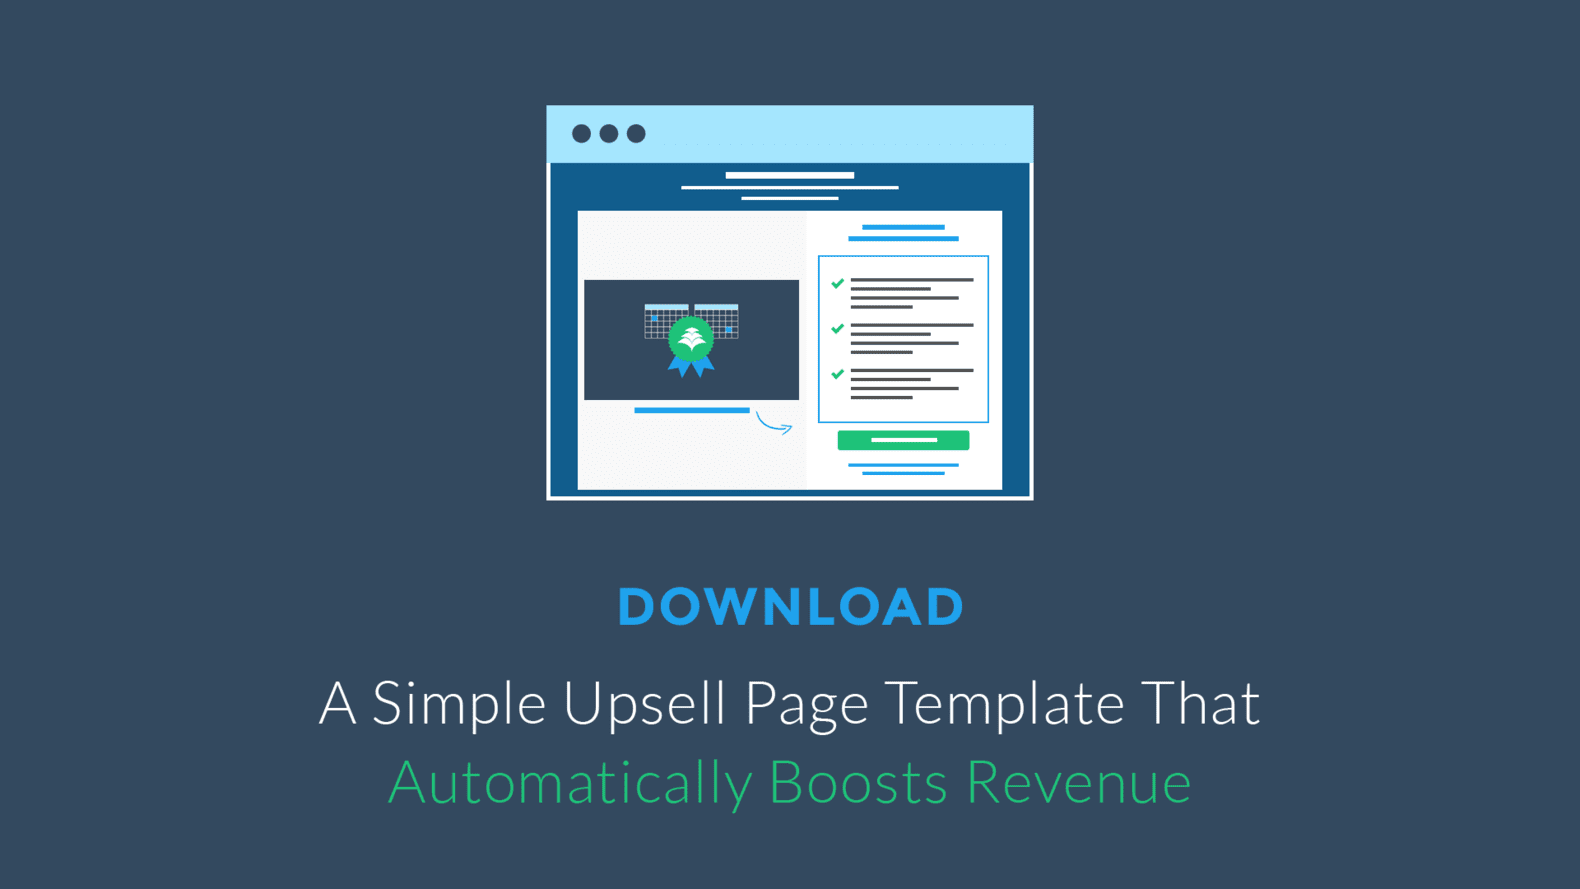 We've seen LeadPages users double profits by implementing an upsell page in their checkout process. Get the upsell page we use at LeadPages to do the same.